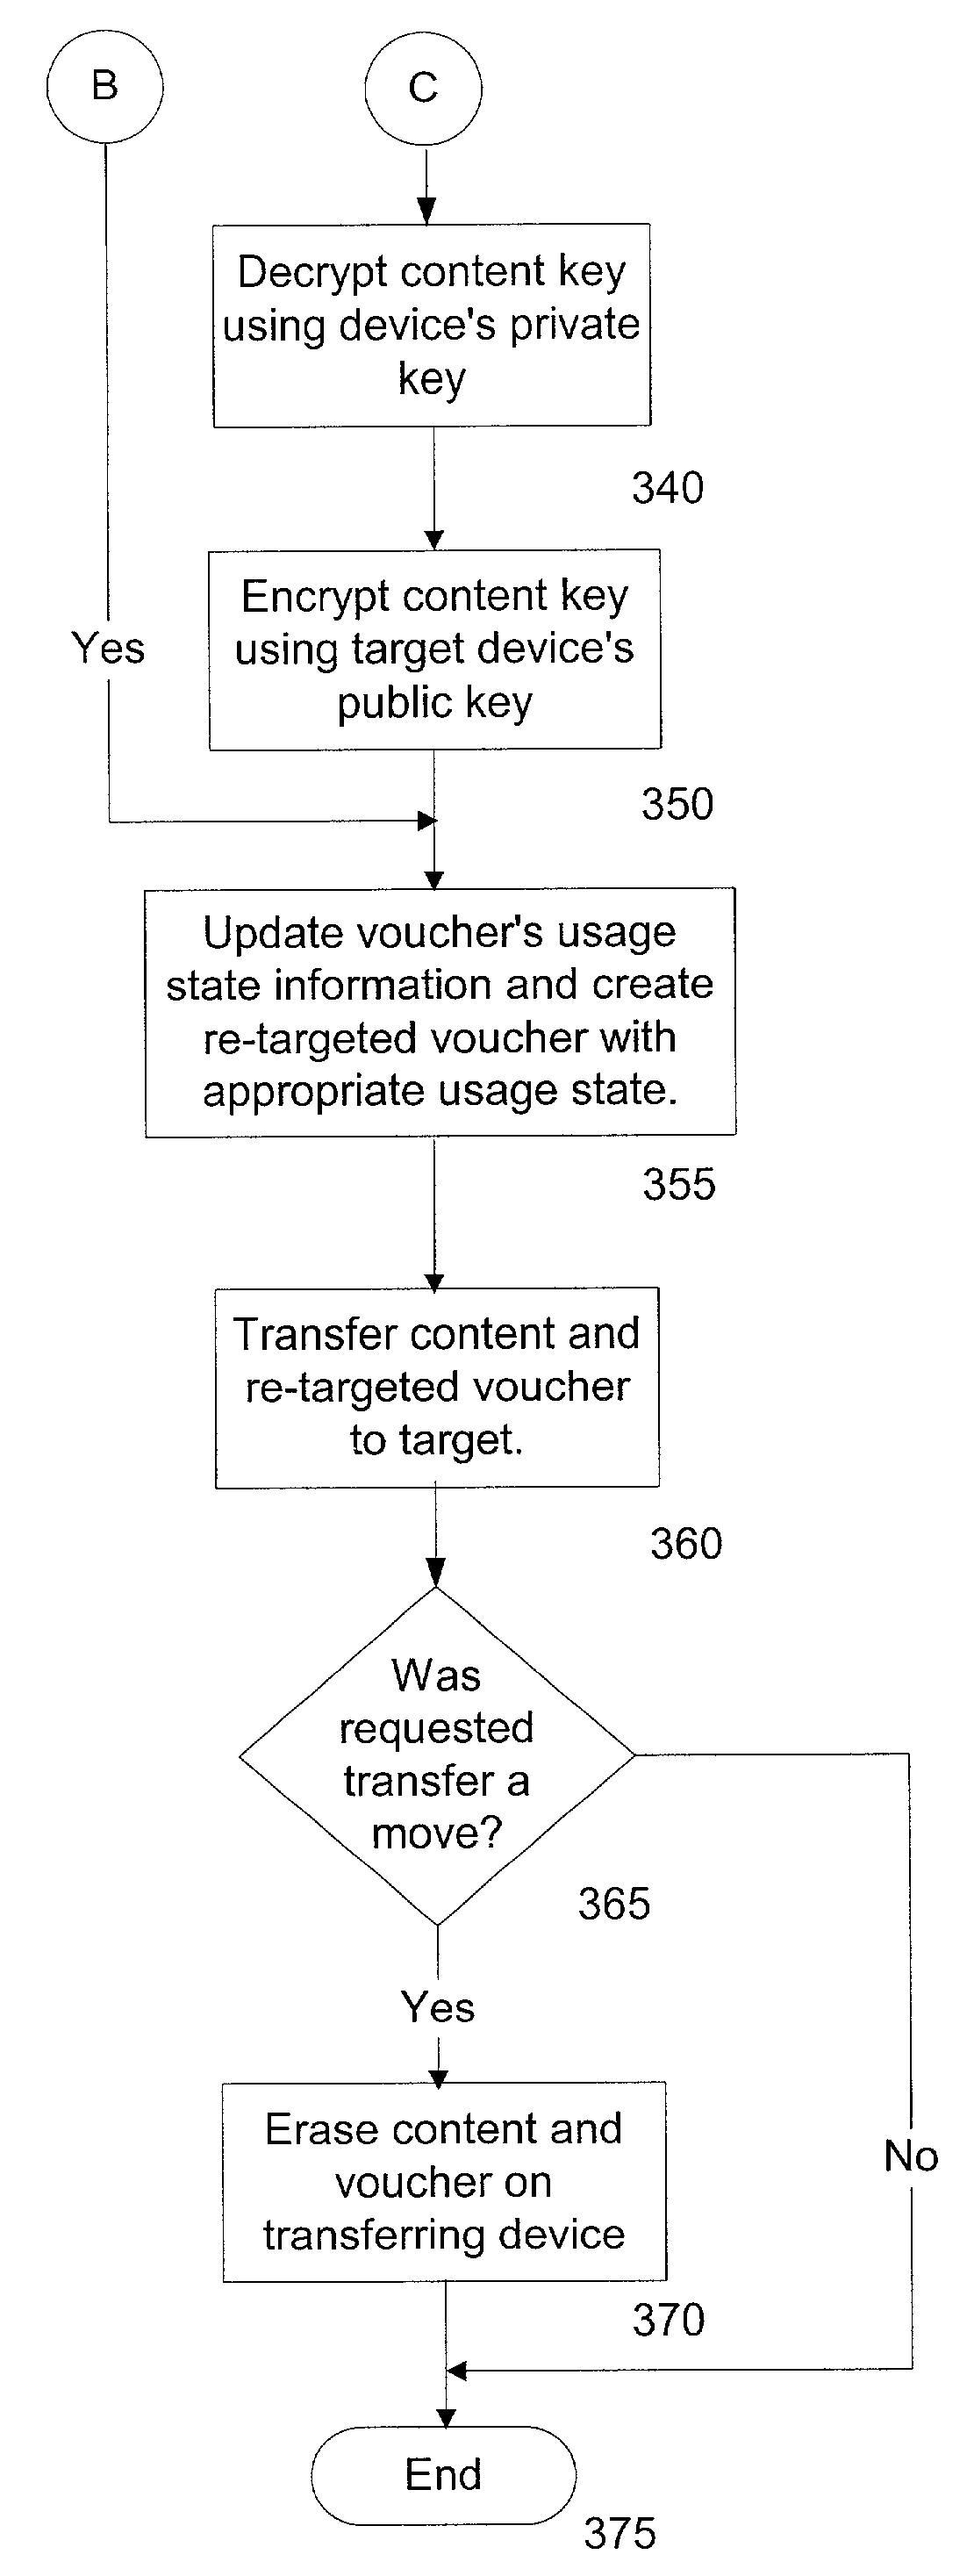 System and method for controlled copying and moving of content between devices and domains based on conditional encryption of content key depending on usage